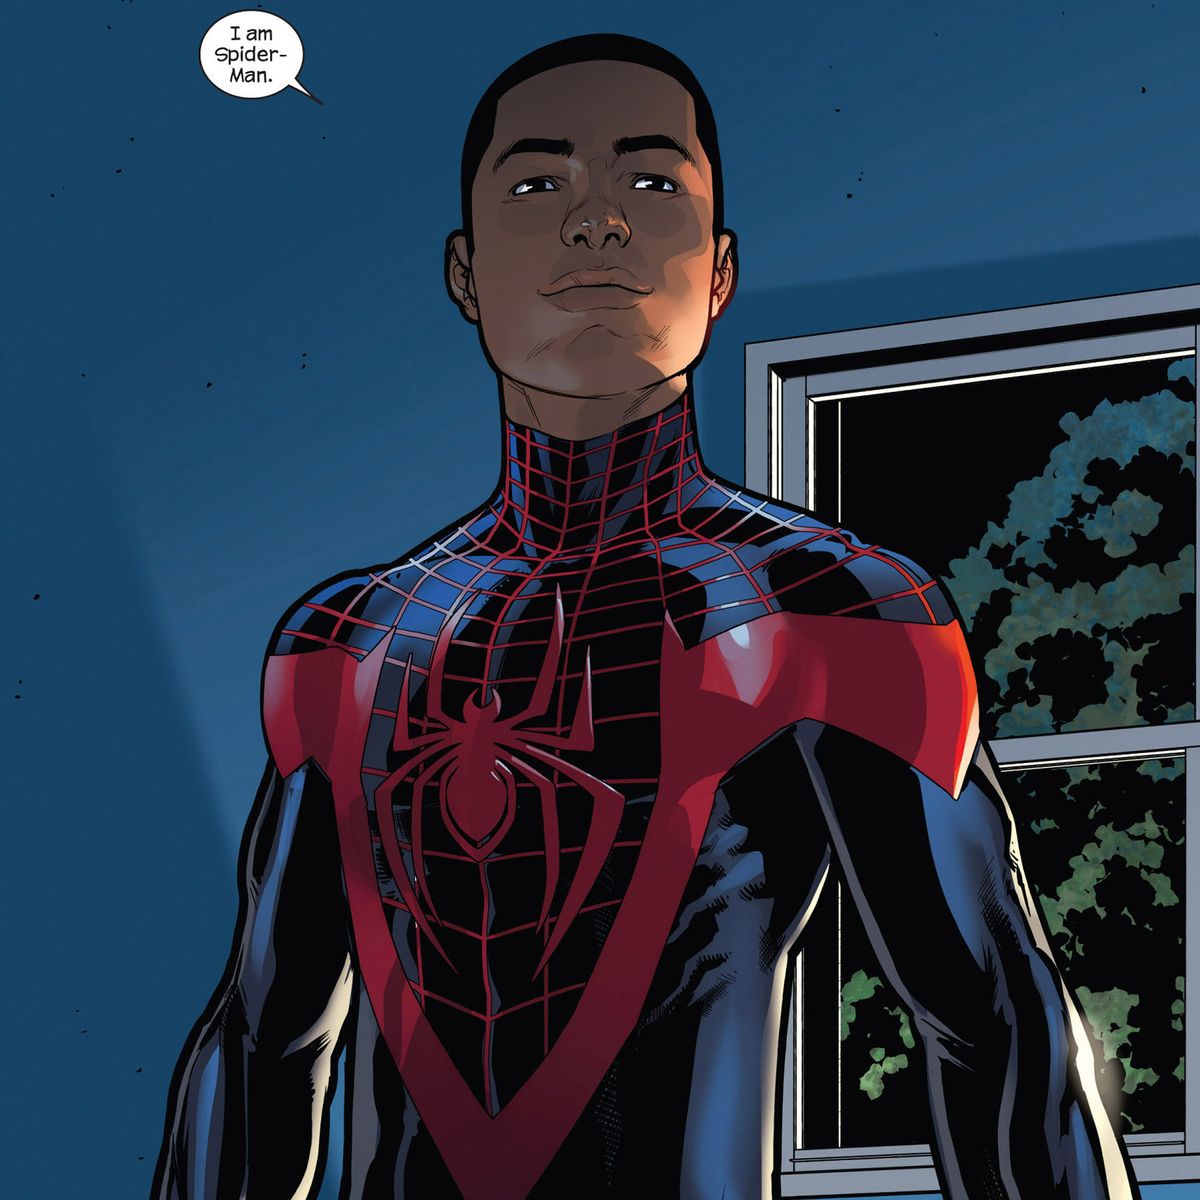 Hey web-heads, Marvel is giving us Miles Morales in a Spider-Man movie